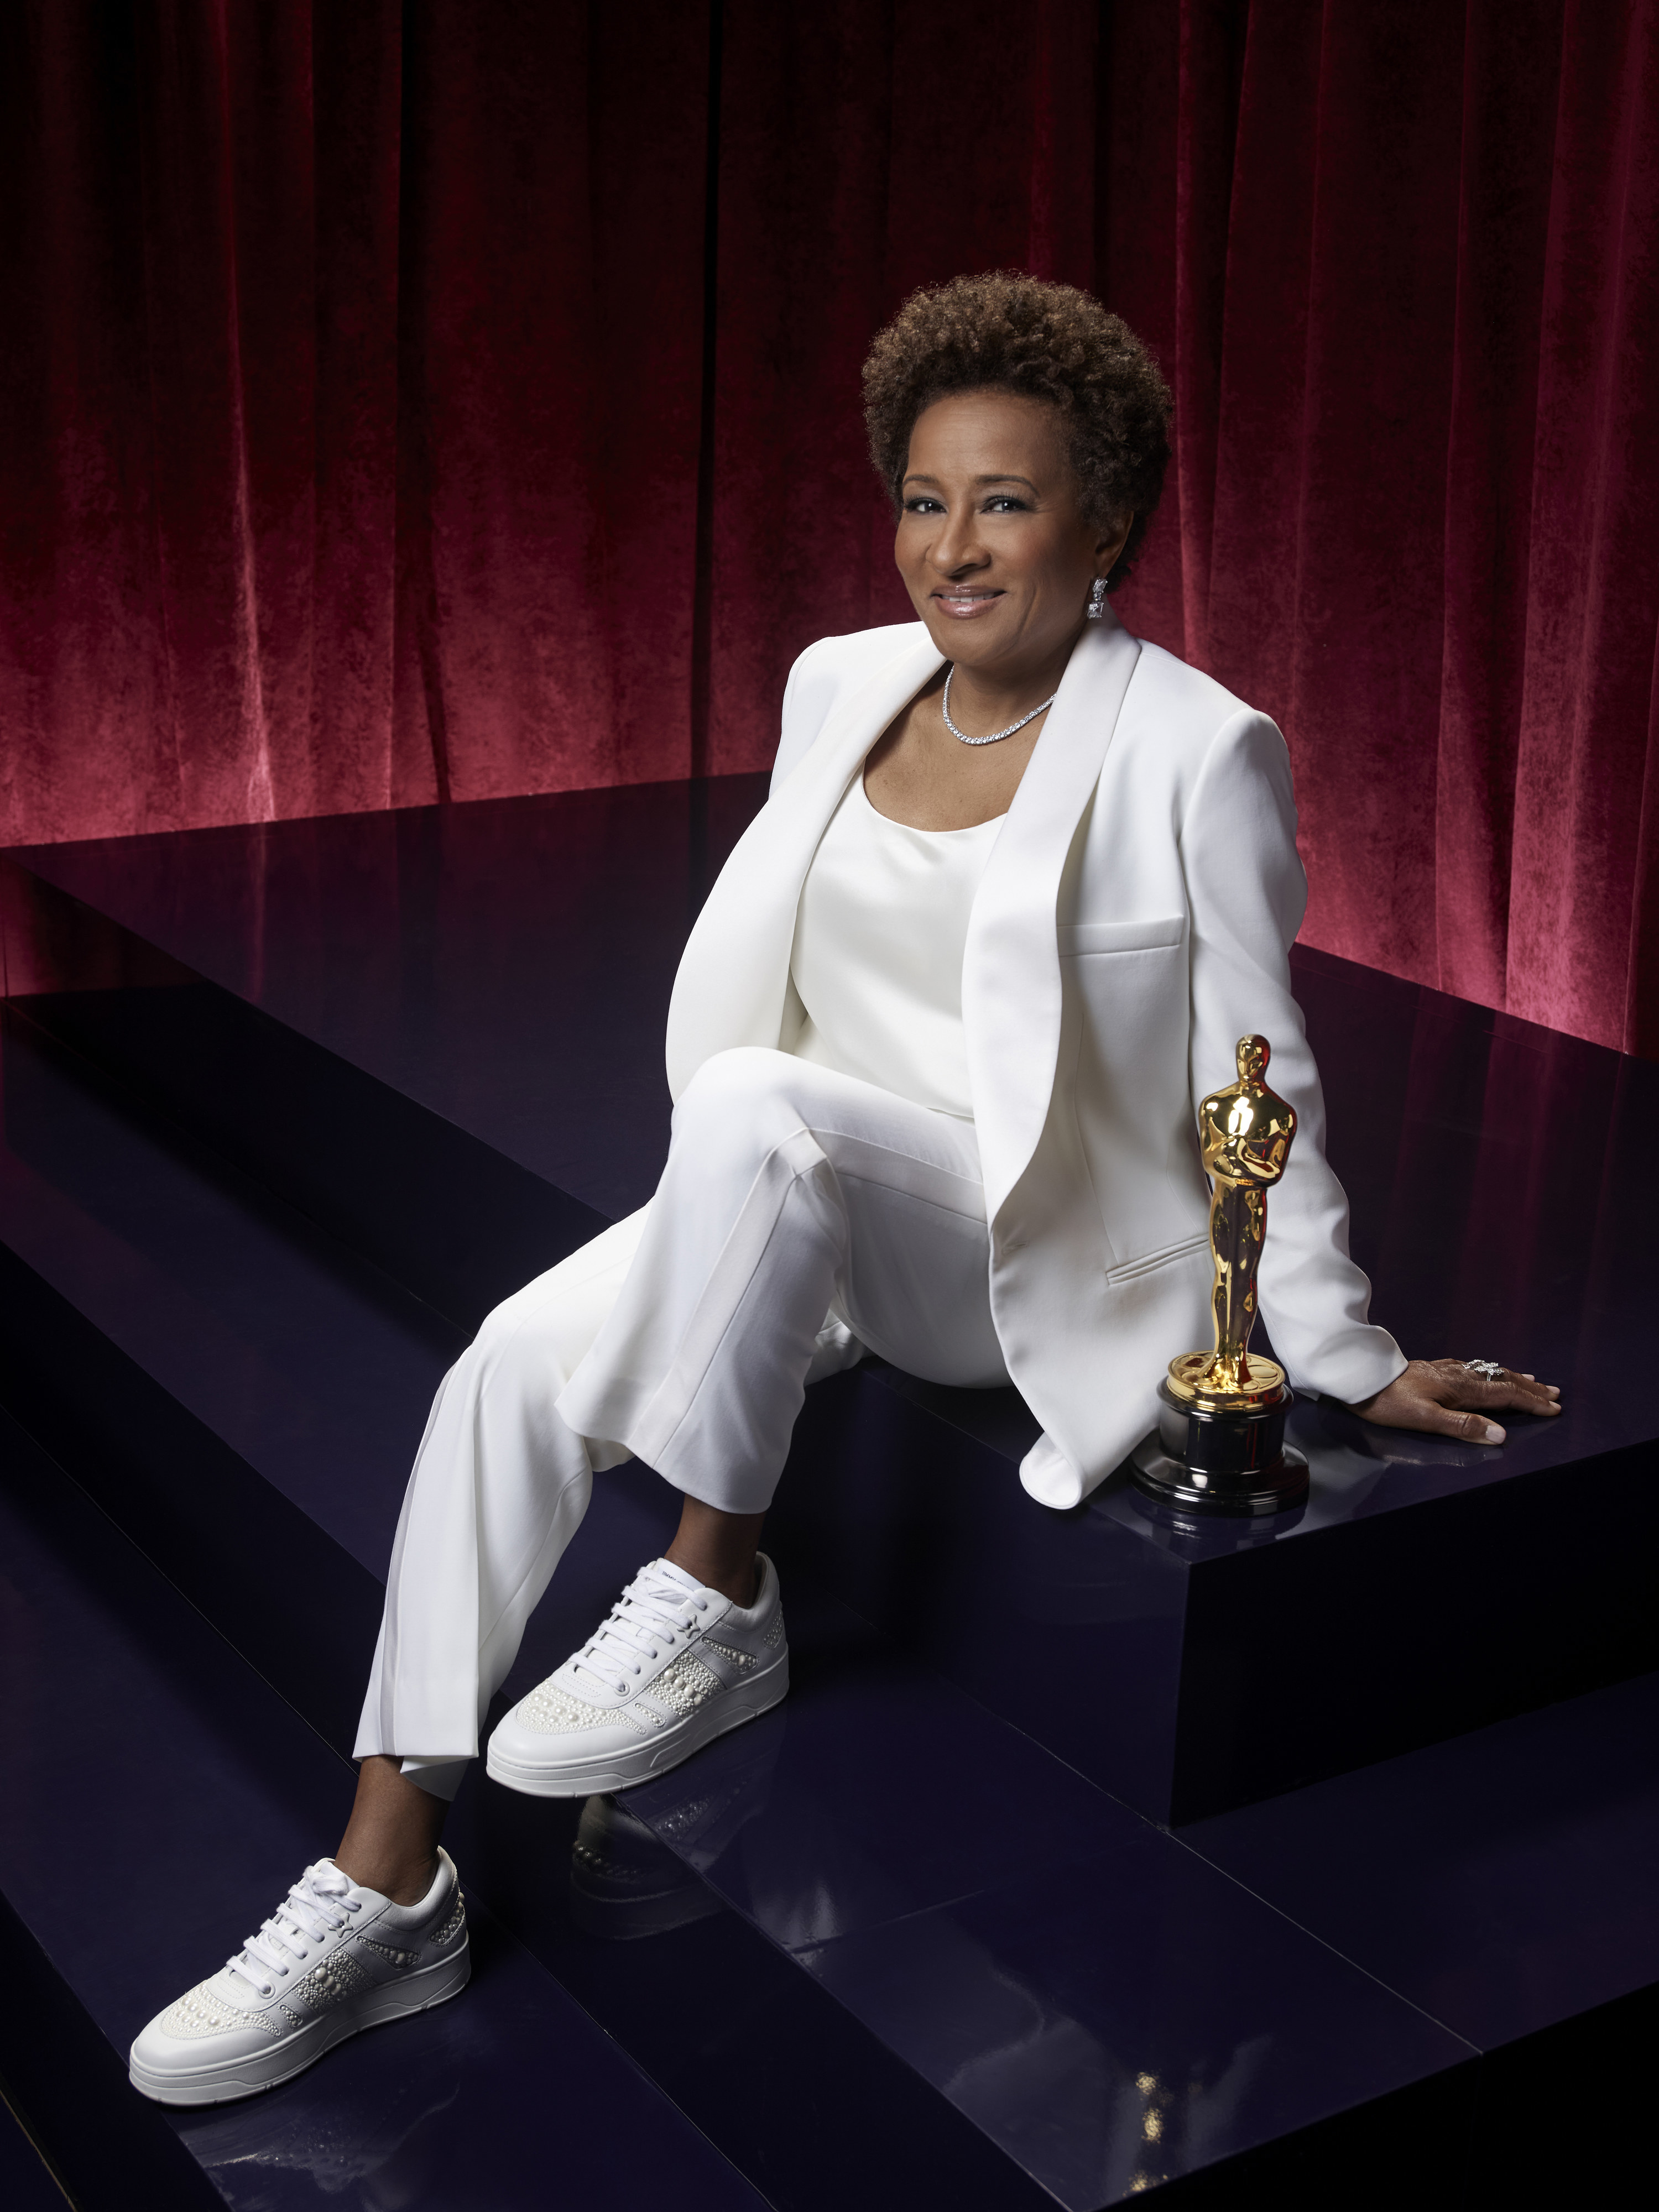 Wanda sits on some black steps wearing an all-white suit with white sneakers and a silver necklace.